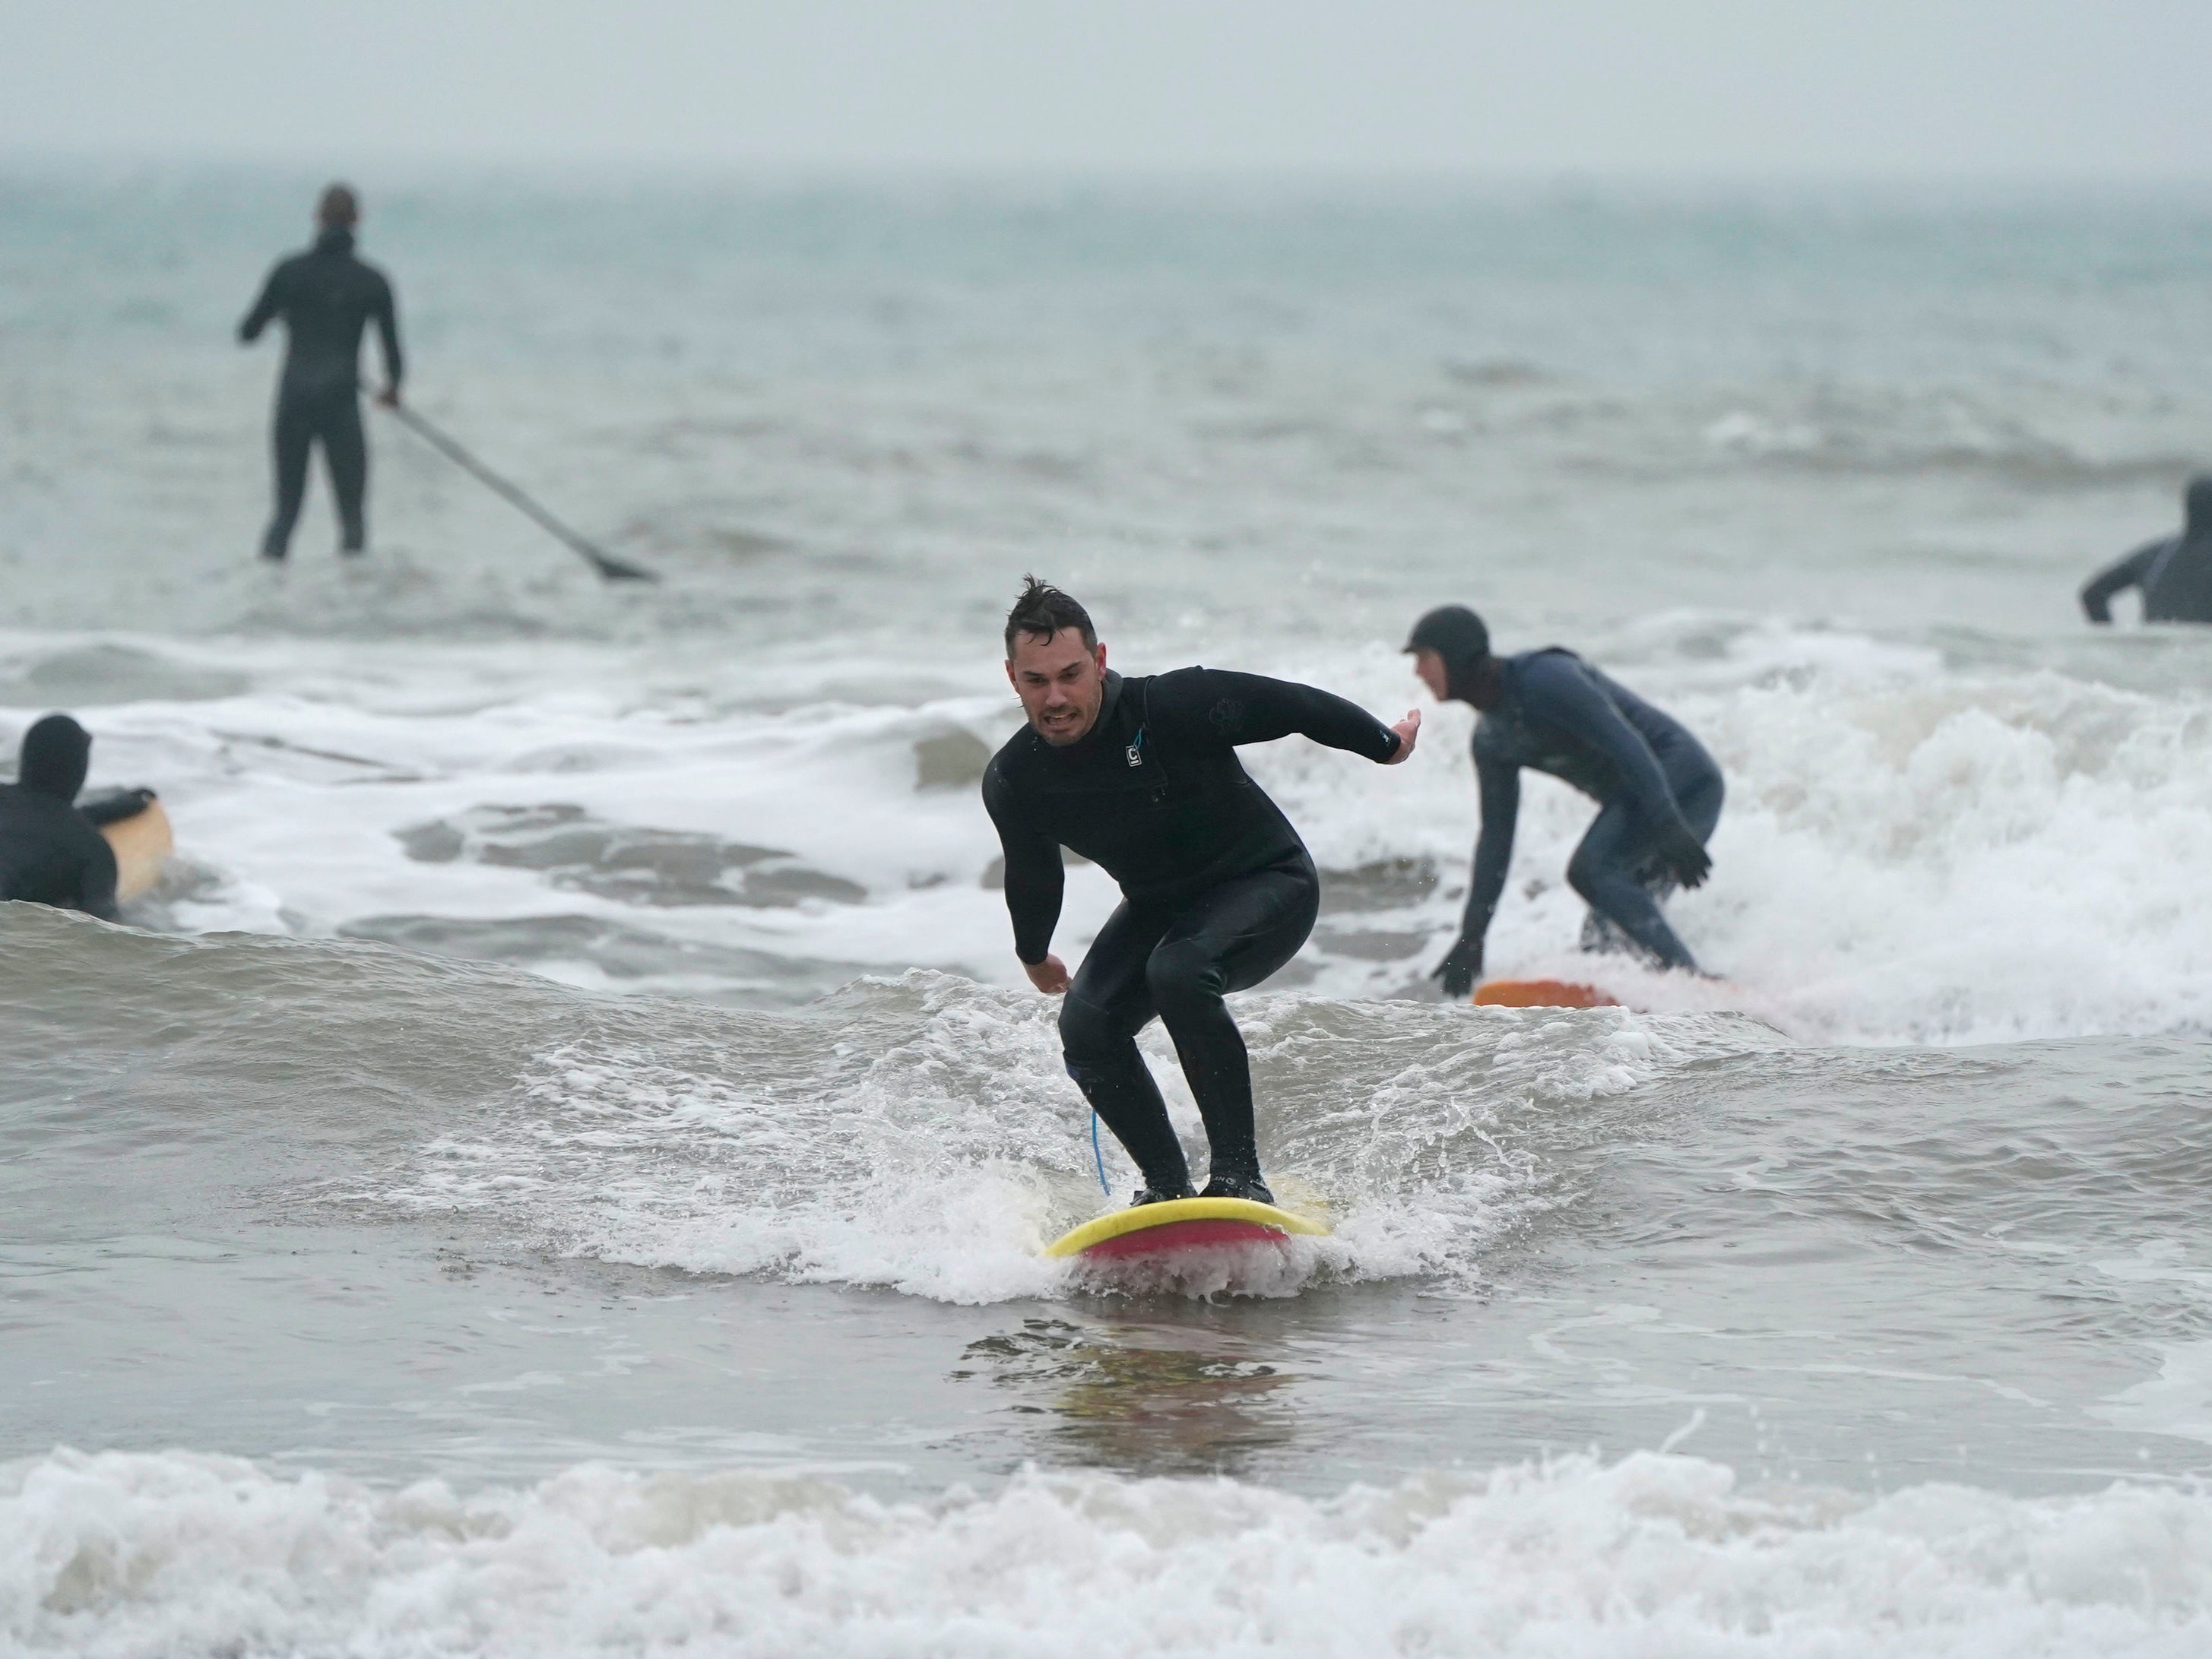 A surfer rides a wave in the sea off of Bournemouth beach in Dorset